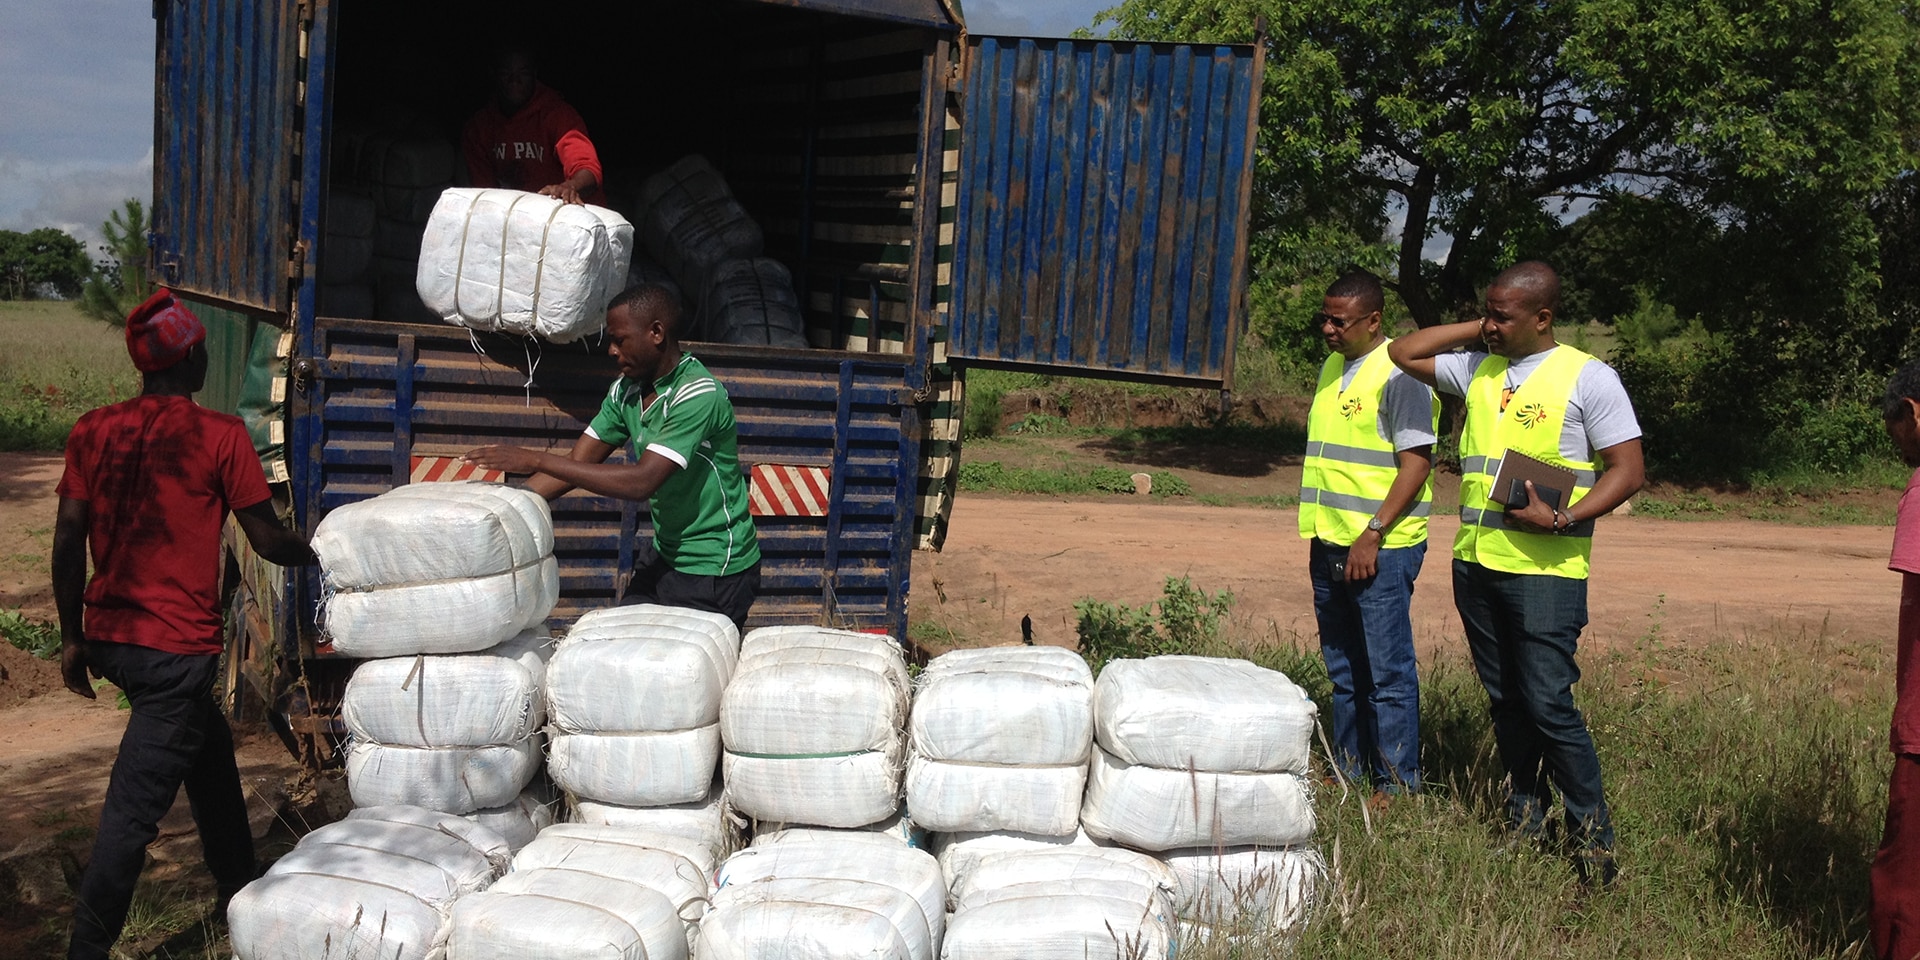 Some men unload white sacks containing mosquito nets from a truck.